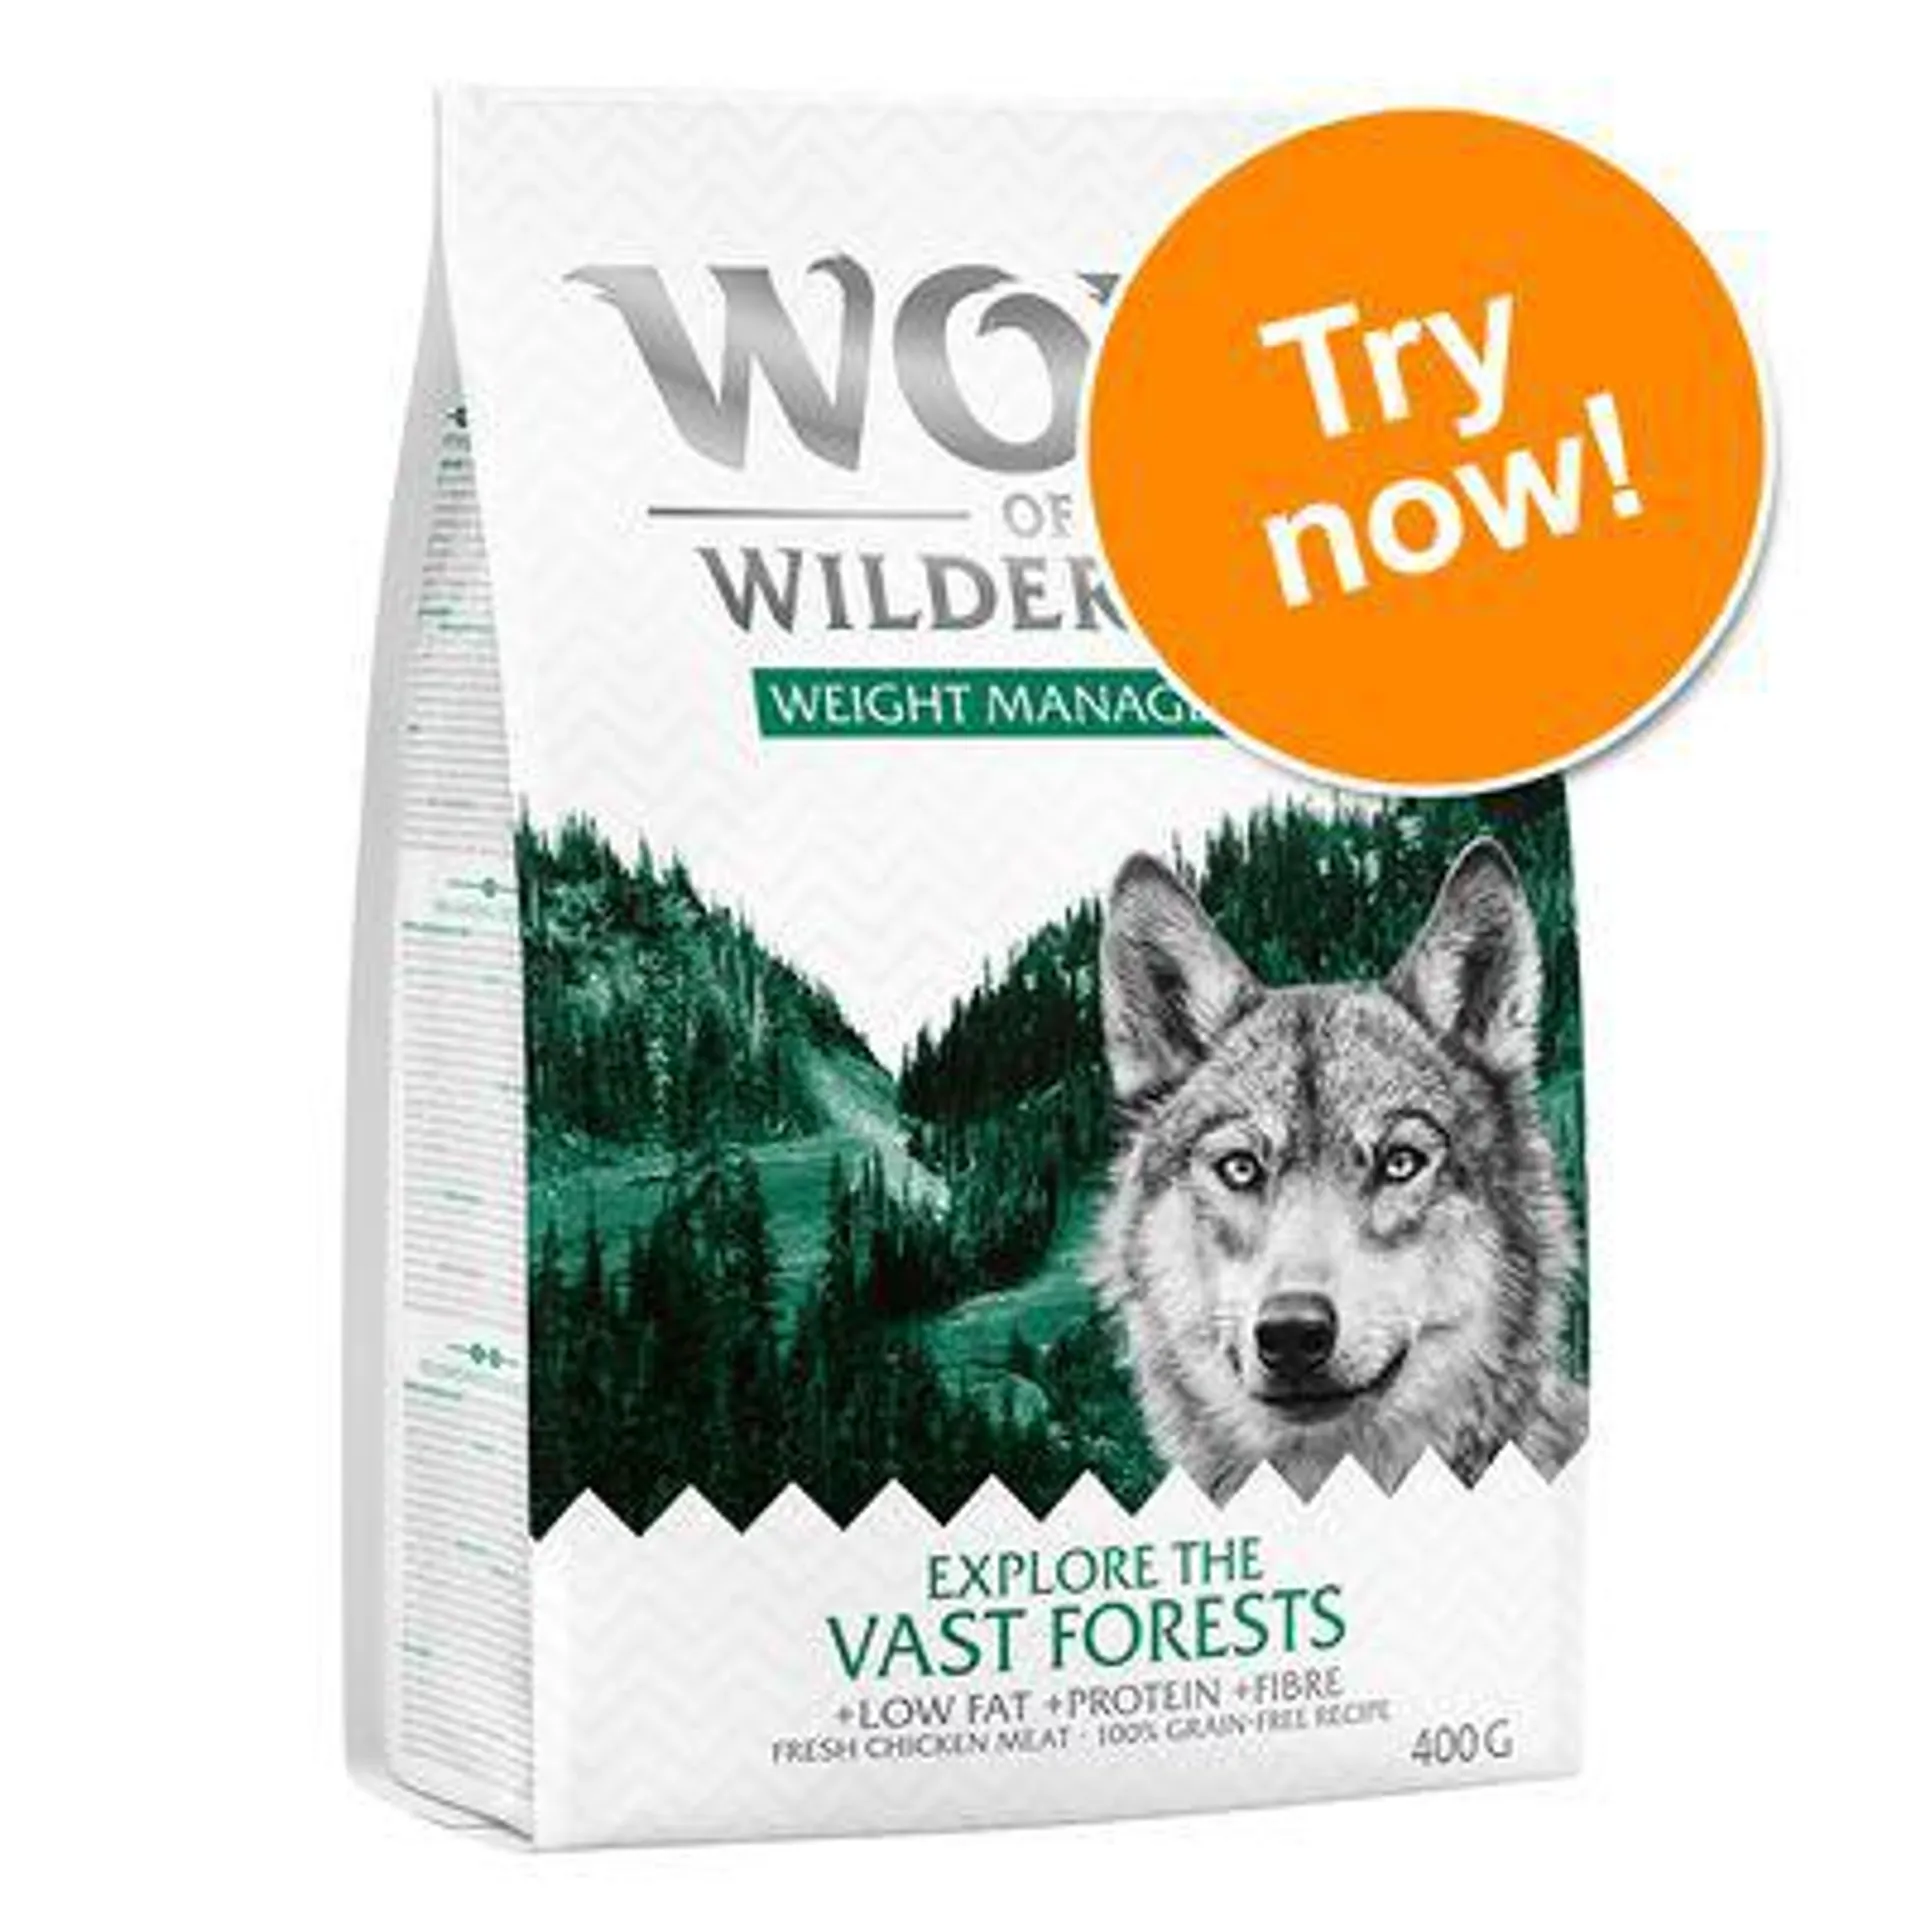 Wolf of Wilderness "Explore" Dry Dog Food Trial Pack